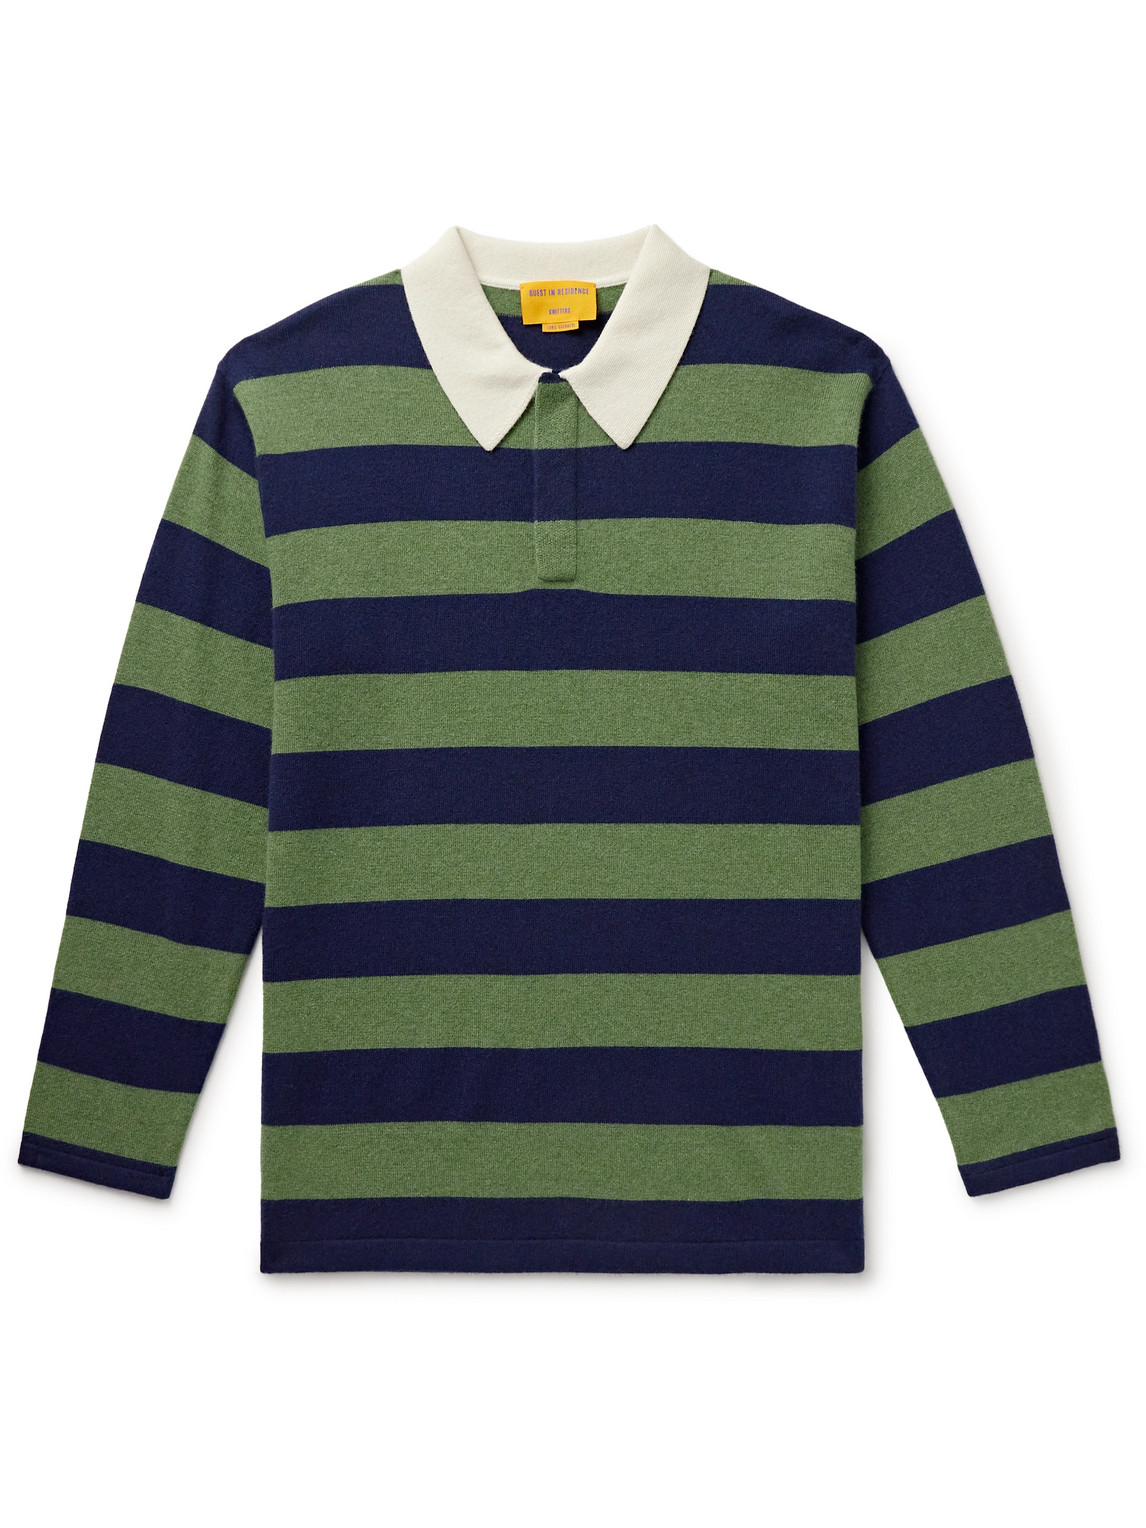 Guest In Residence - Rugby Striped Cashmere Polo Shirt - Men - Green - M von Guest In Residence